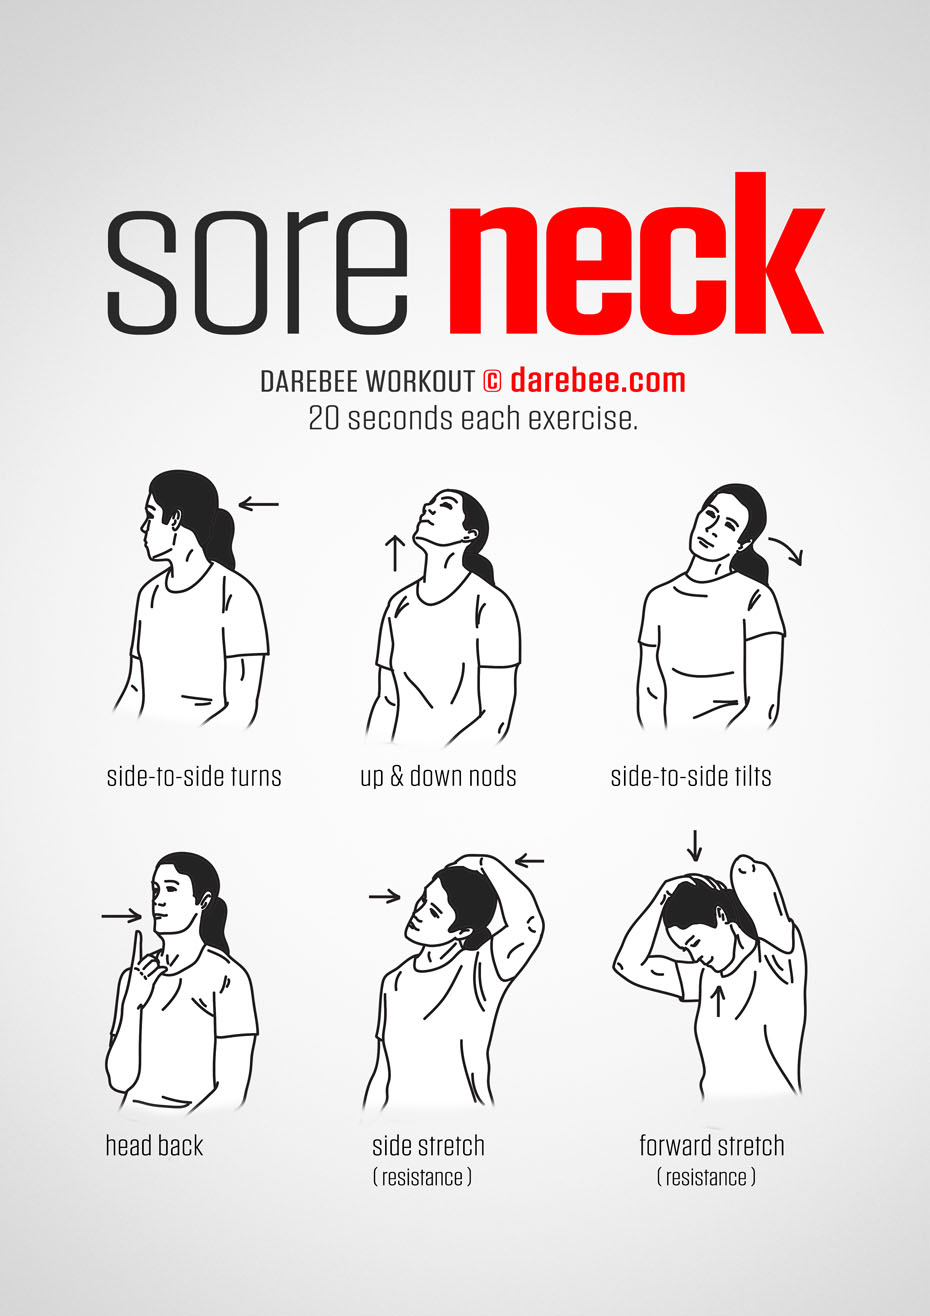 Printable Neck Stretches For The First Stretch Lower Your Chin To Your Chest While Keeping Your